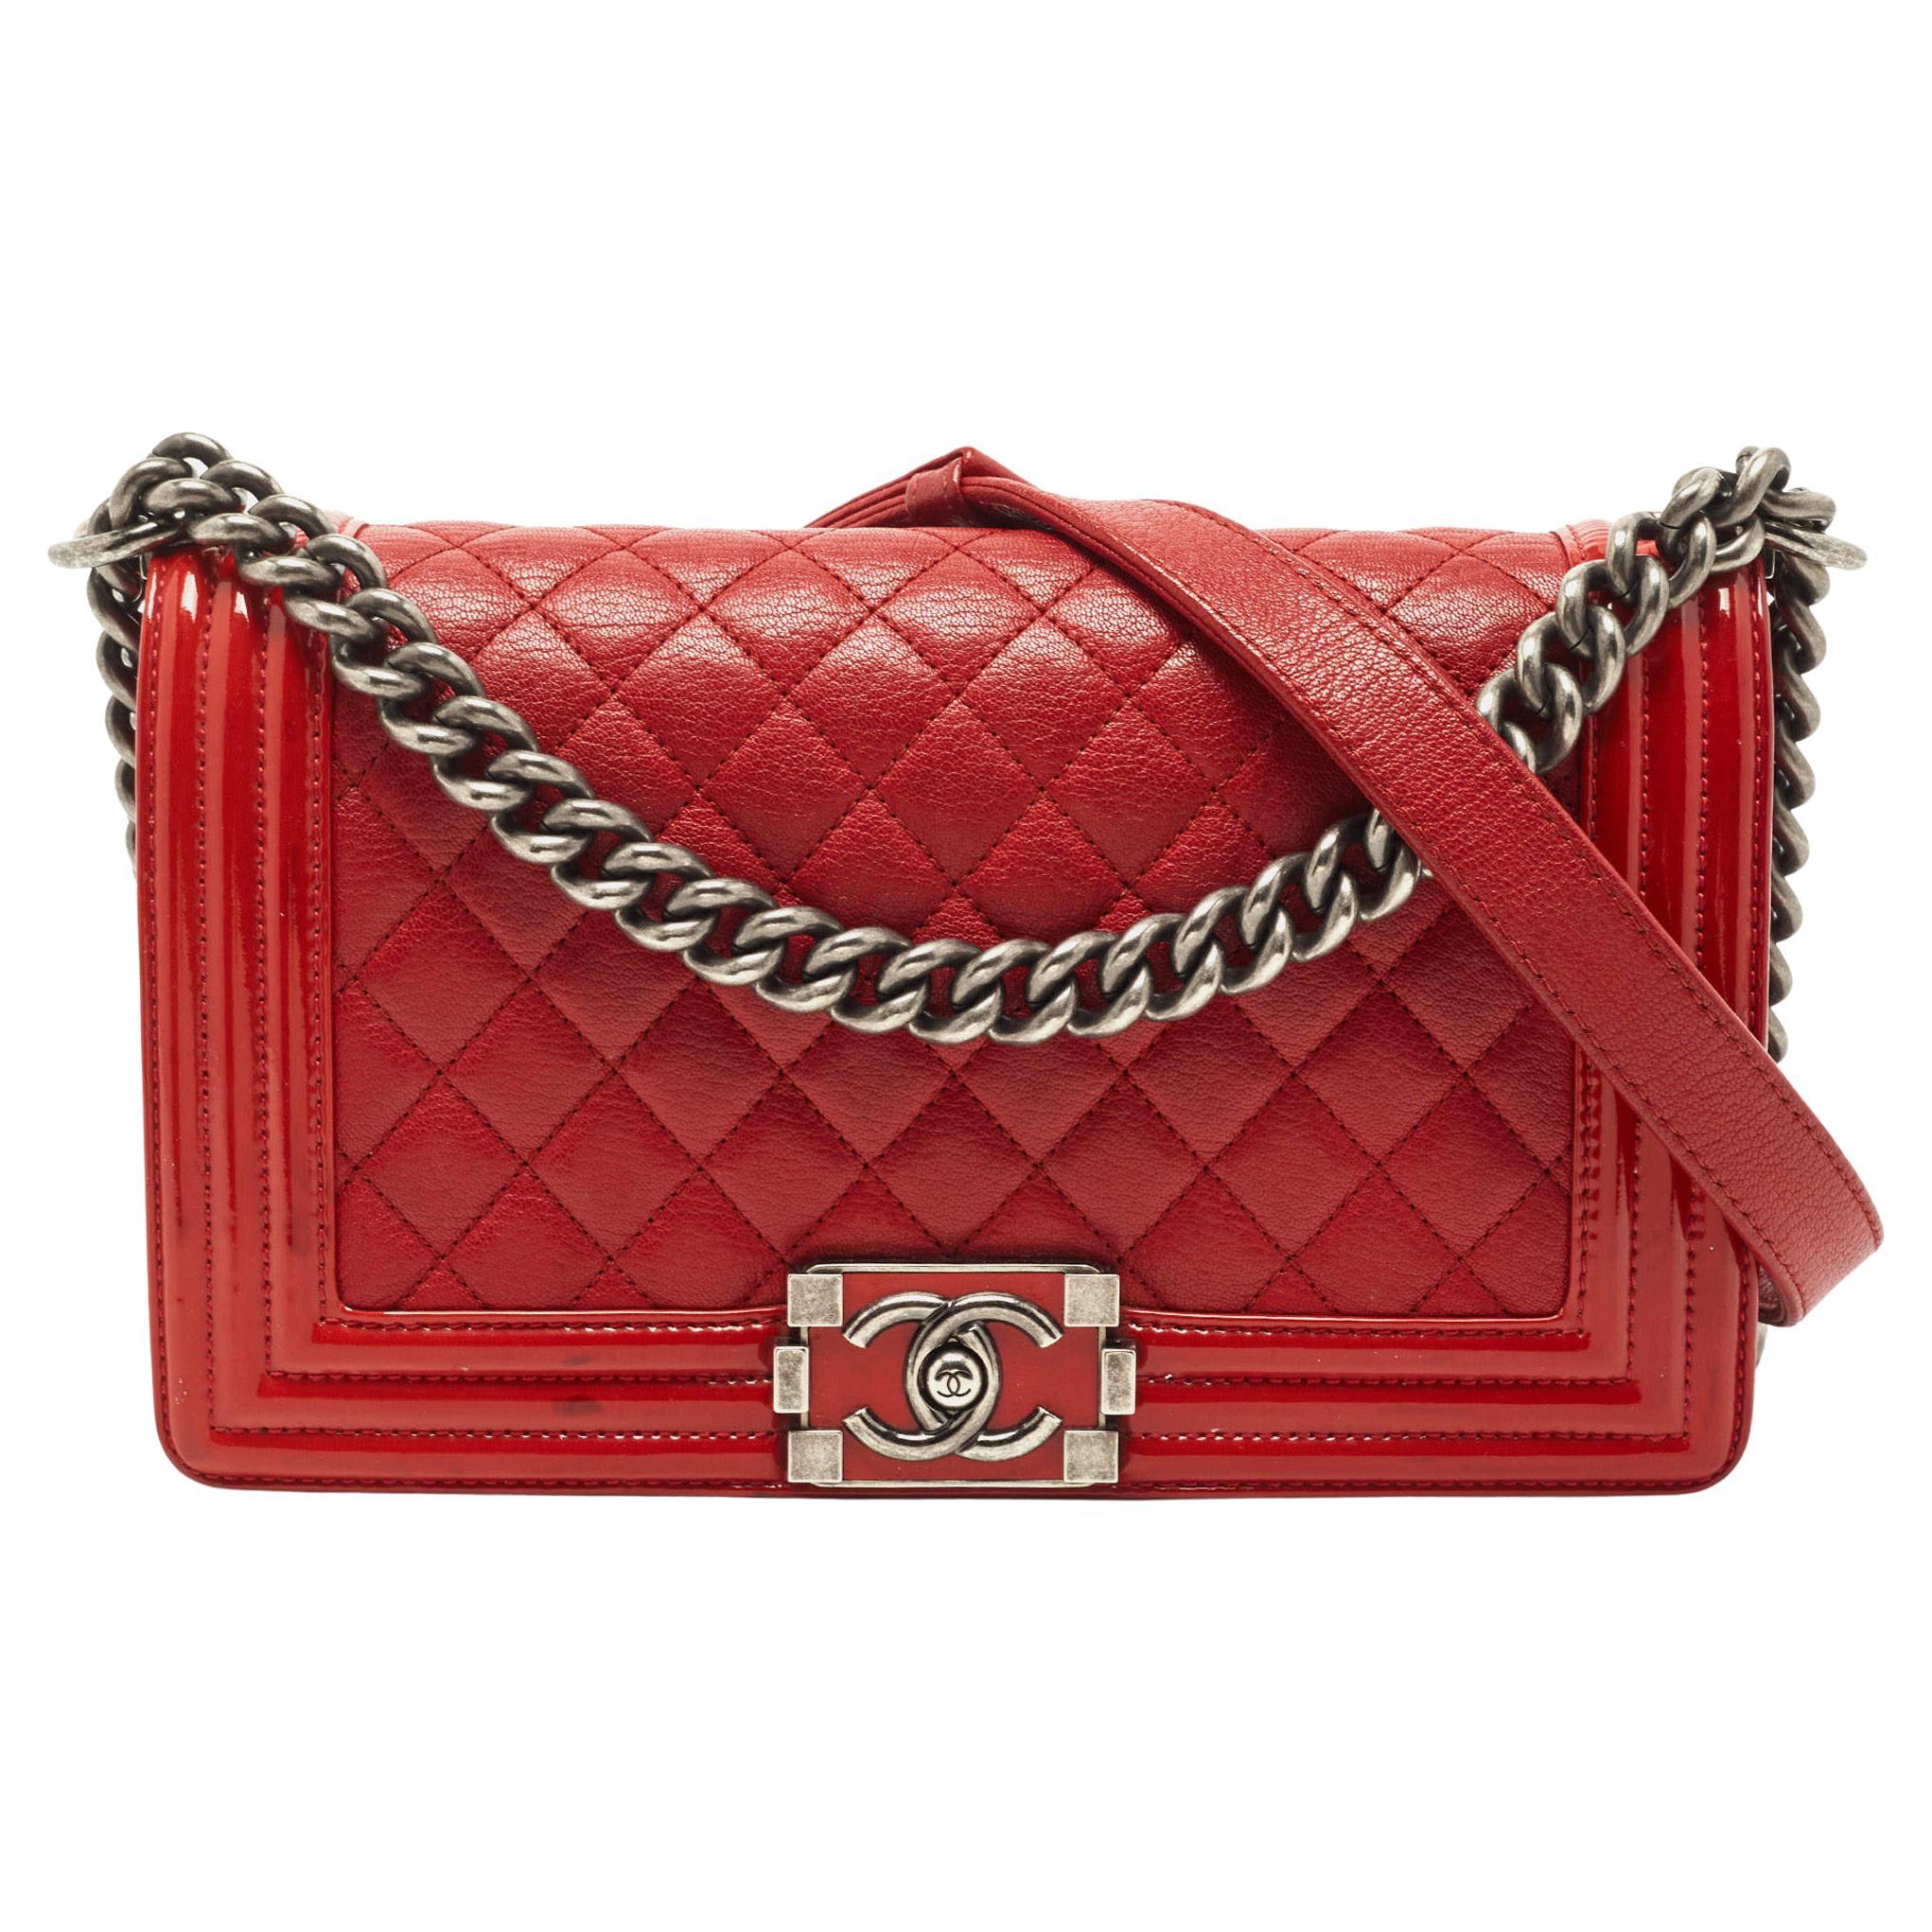 Chanel Red Quilted Leather and Patent Medium Boy Flap Bag For Sale